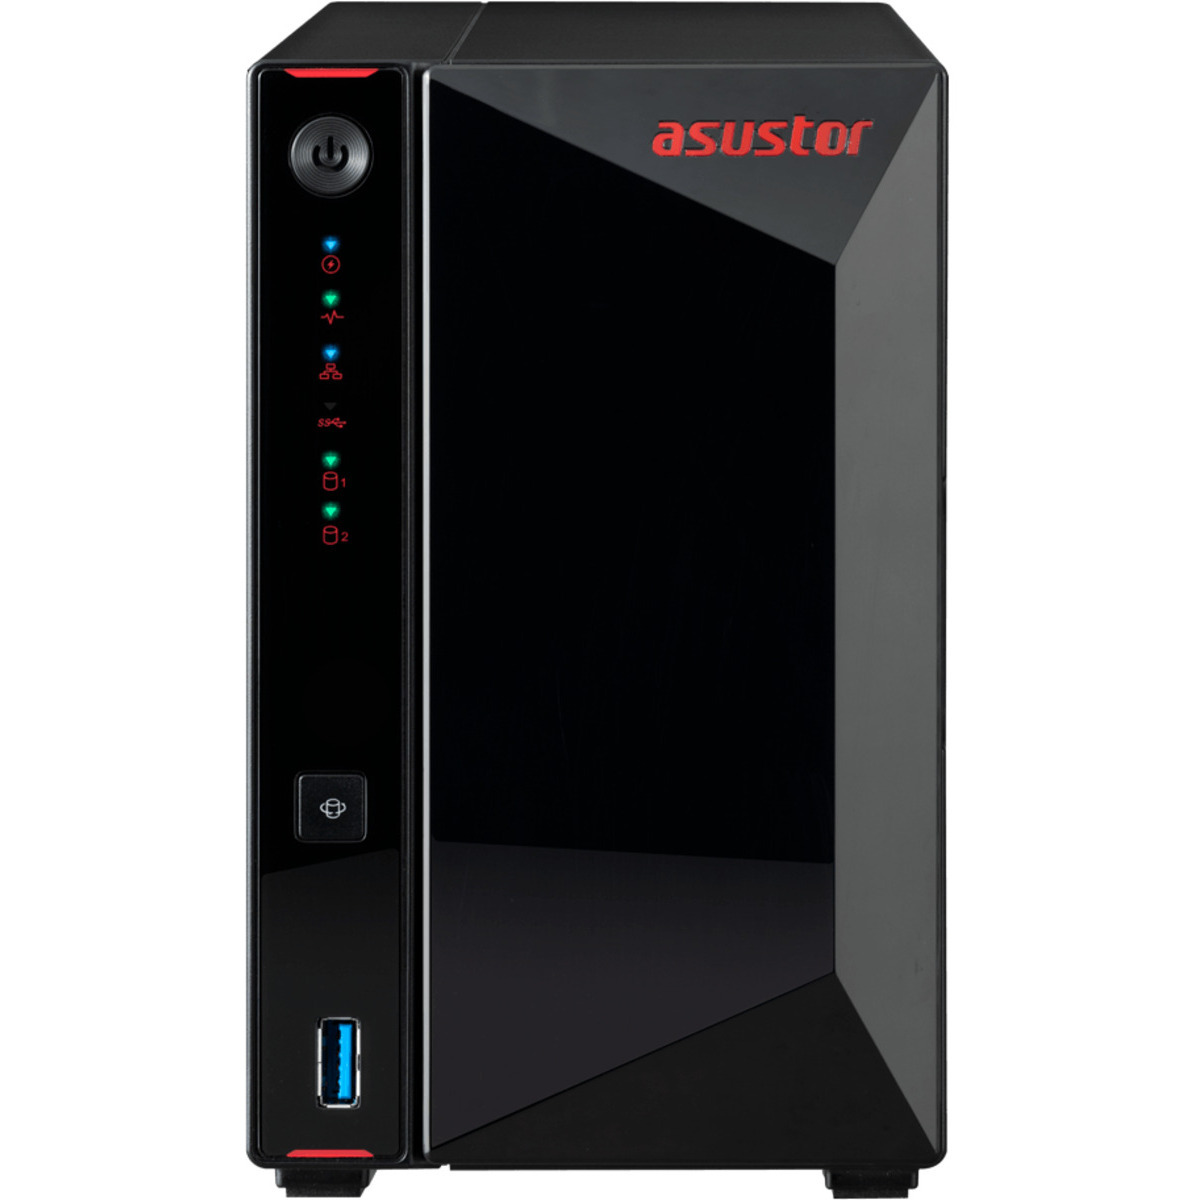 buy $1099 ASUSTOR AS5202T Nimbustor 40tb Desktop NAS - Network Attached Storage Device 2x20000gb Seagate EXOS X20 ST20000NM007D 3.5 7200rpm SATA 6Gb/s HDD ENTERPRISE Class Drives Installed - Burn-In Tested - FREE RAM UPGRADE - nas headquarters buy network attached storage server device das new raid-5 free shipping usa AS5202T Nimbustor